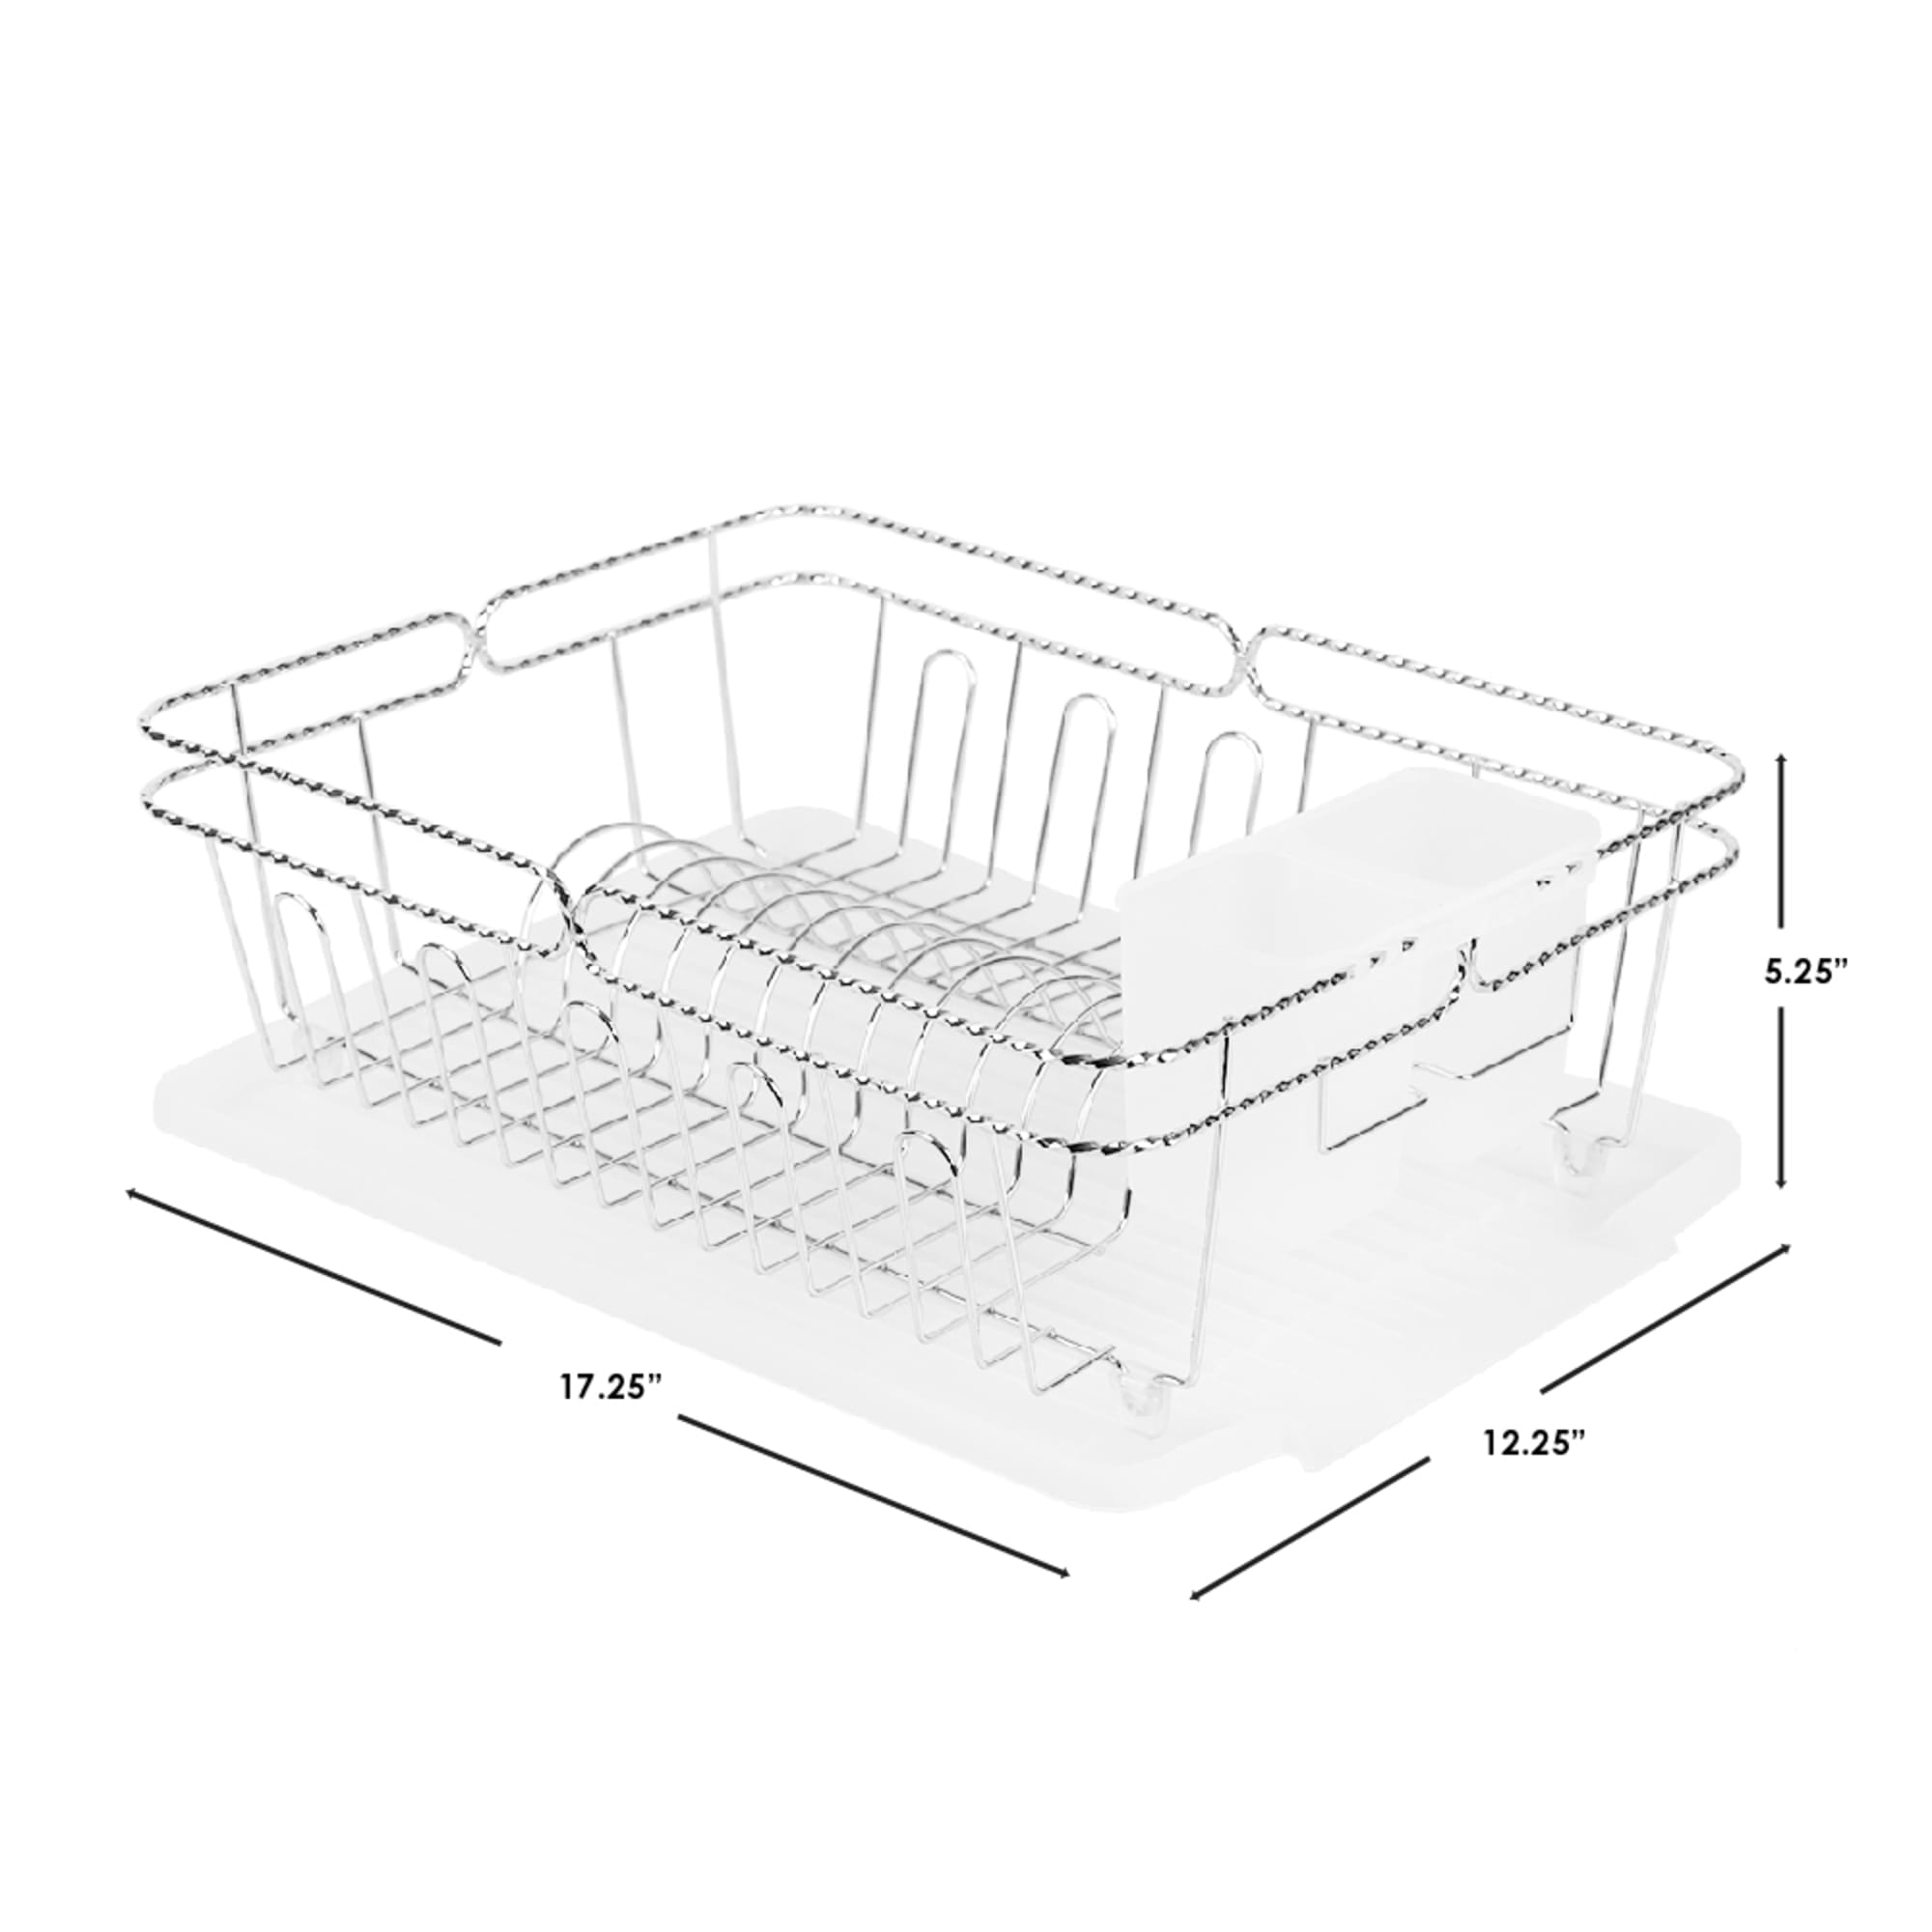 Home Basics Twist Dish Rack with Clear Draining Board $15.00 EACH, CASE PACK OF 6